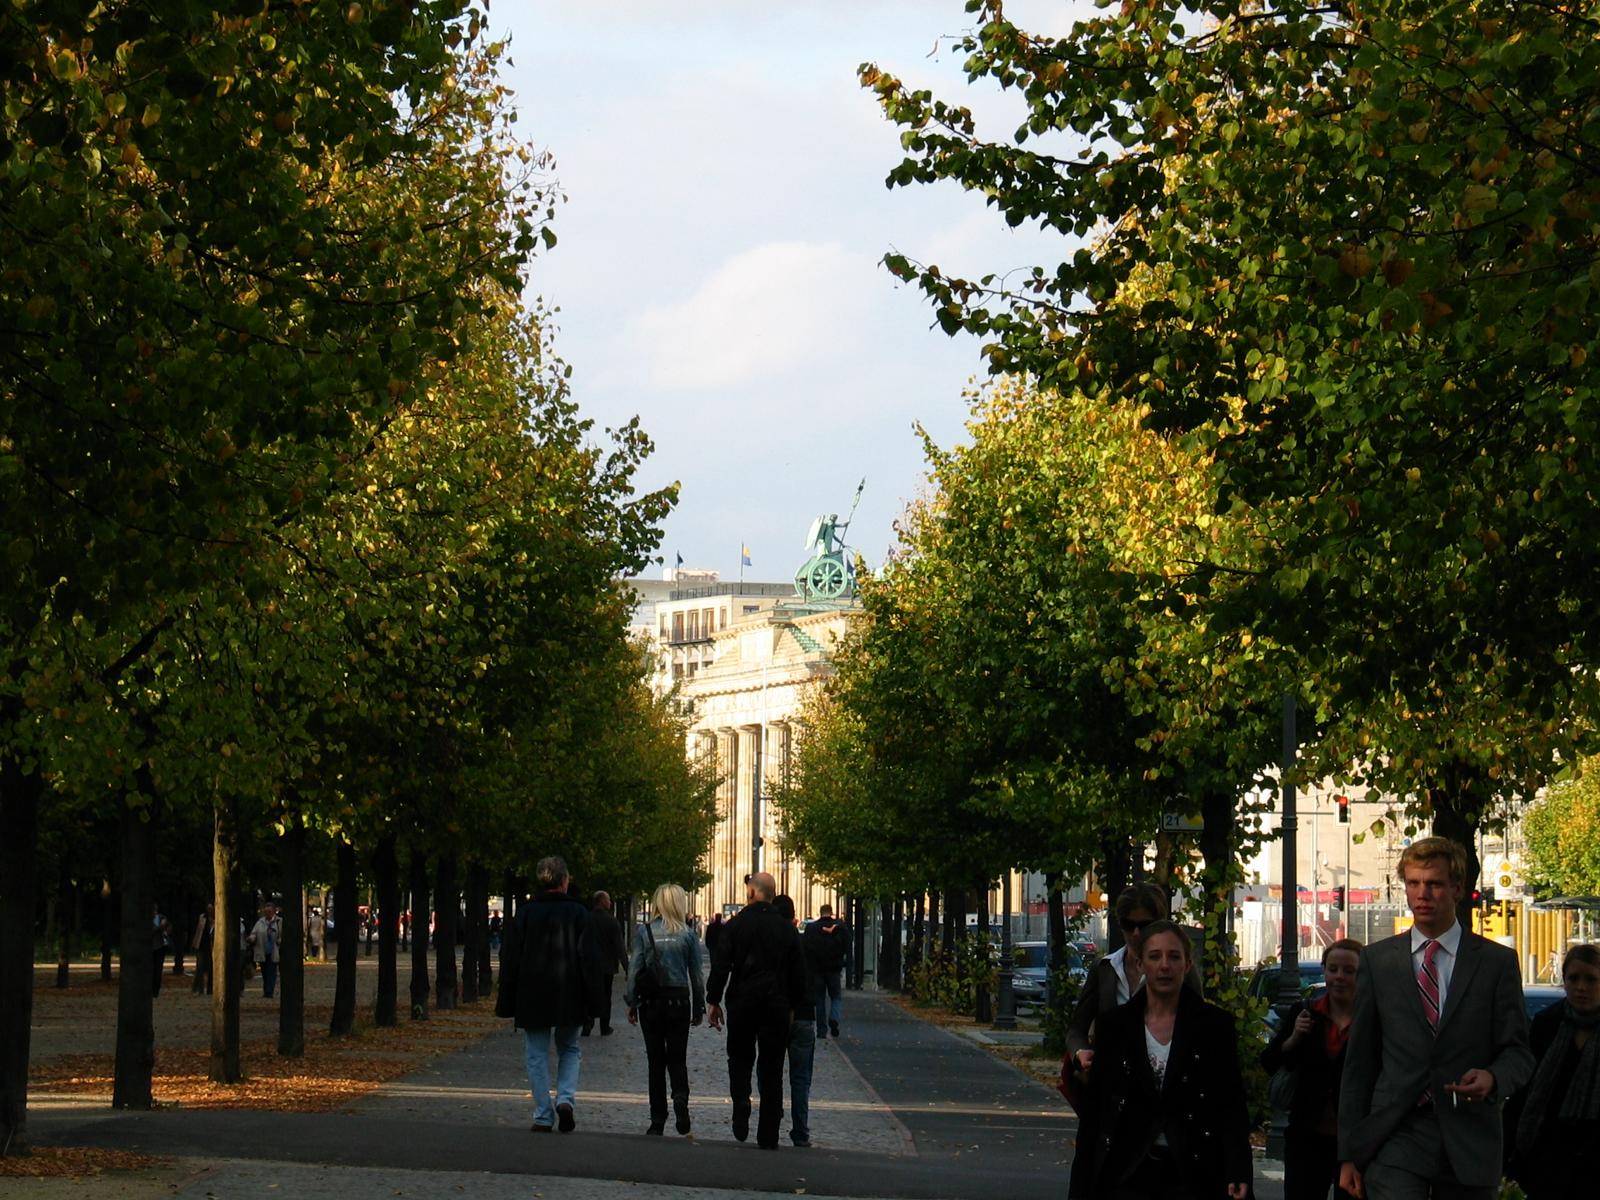 The walkway to the Reichstag